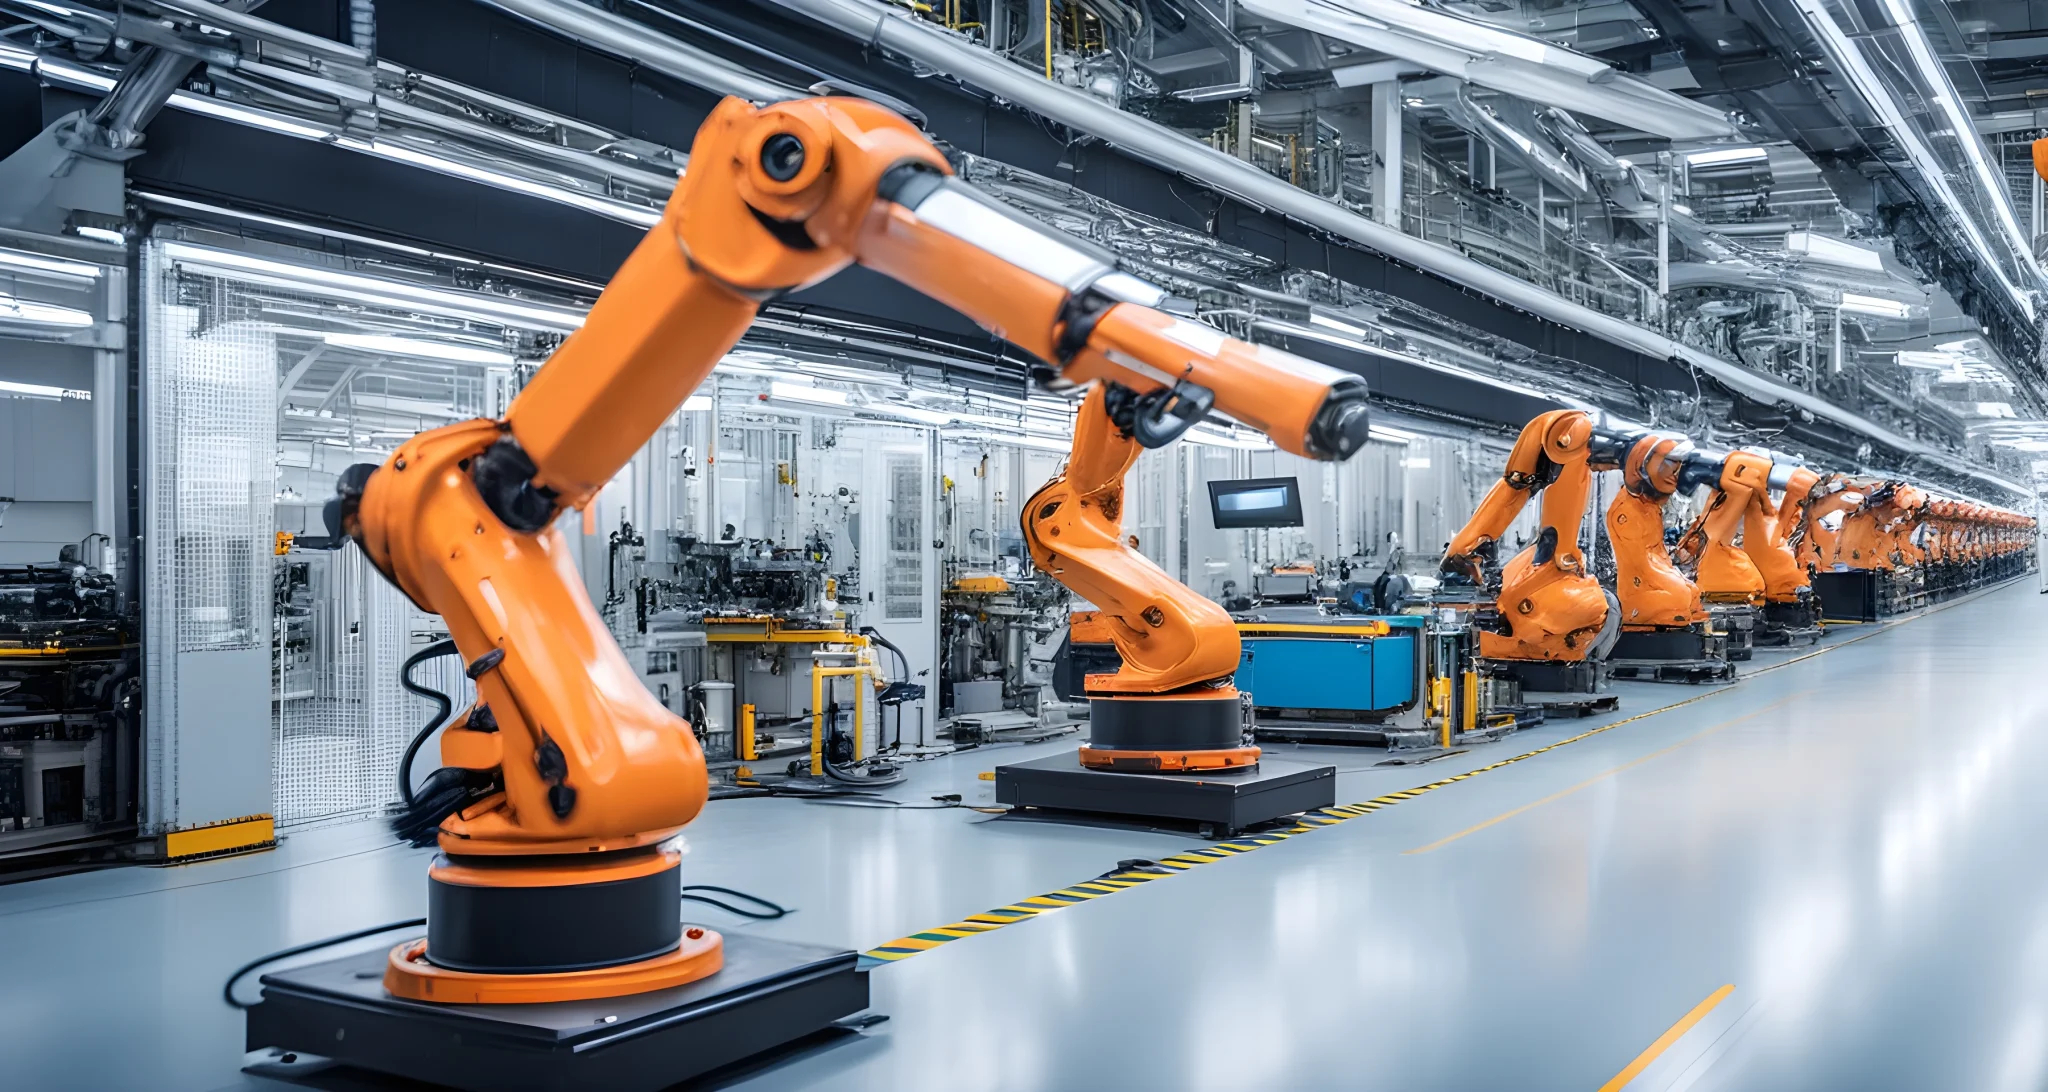 The image shows a modern electric vehicle production line with robotic arms and advanced technology.